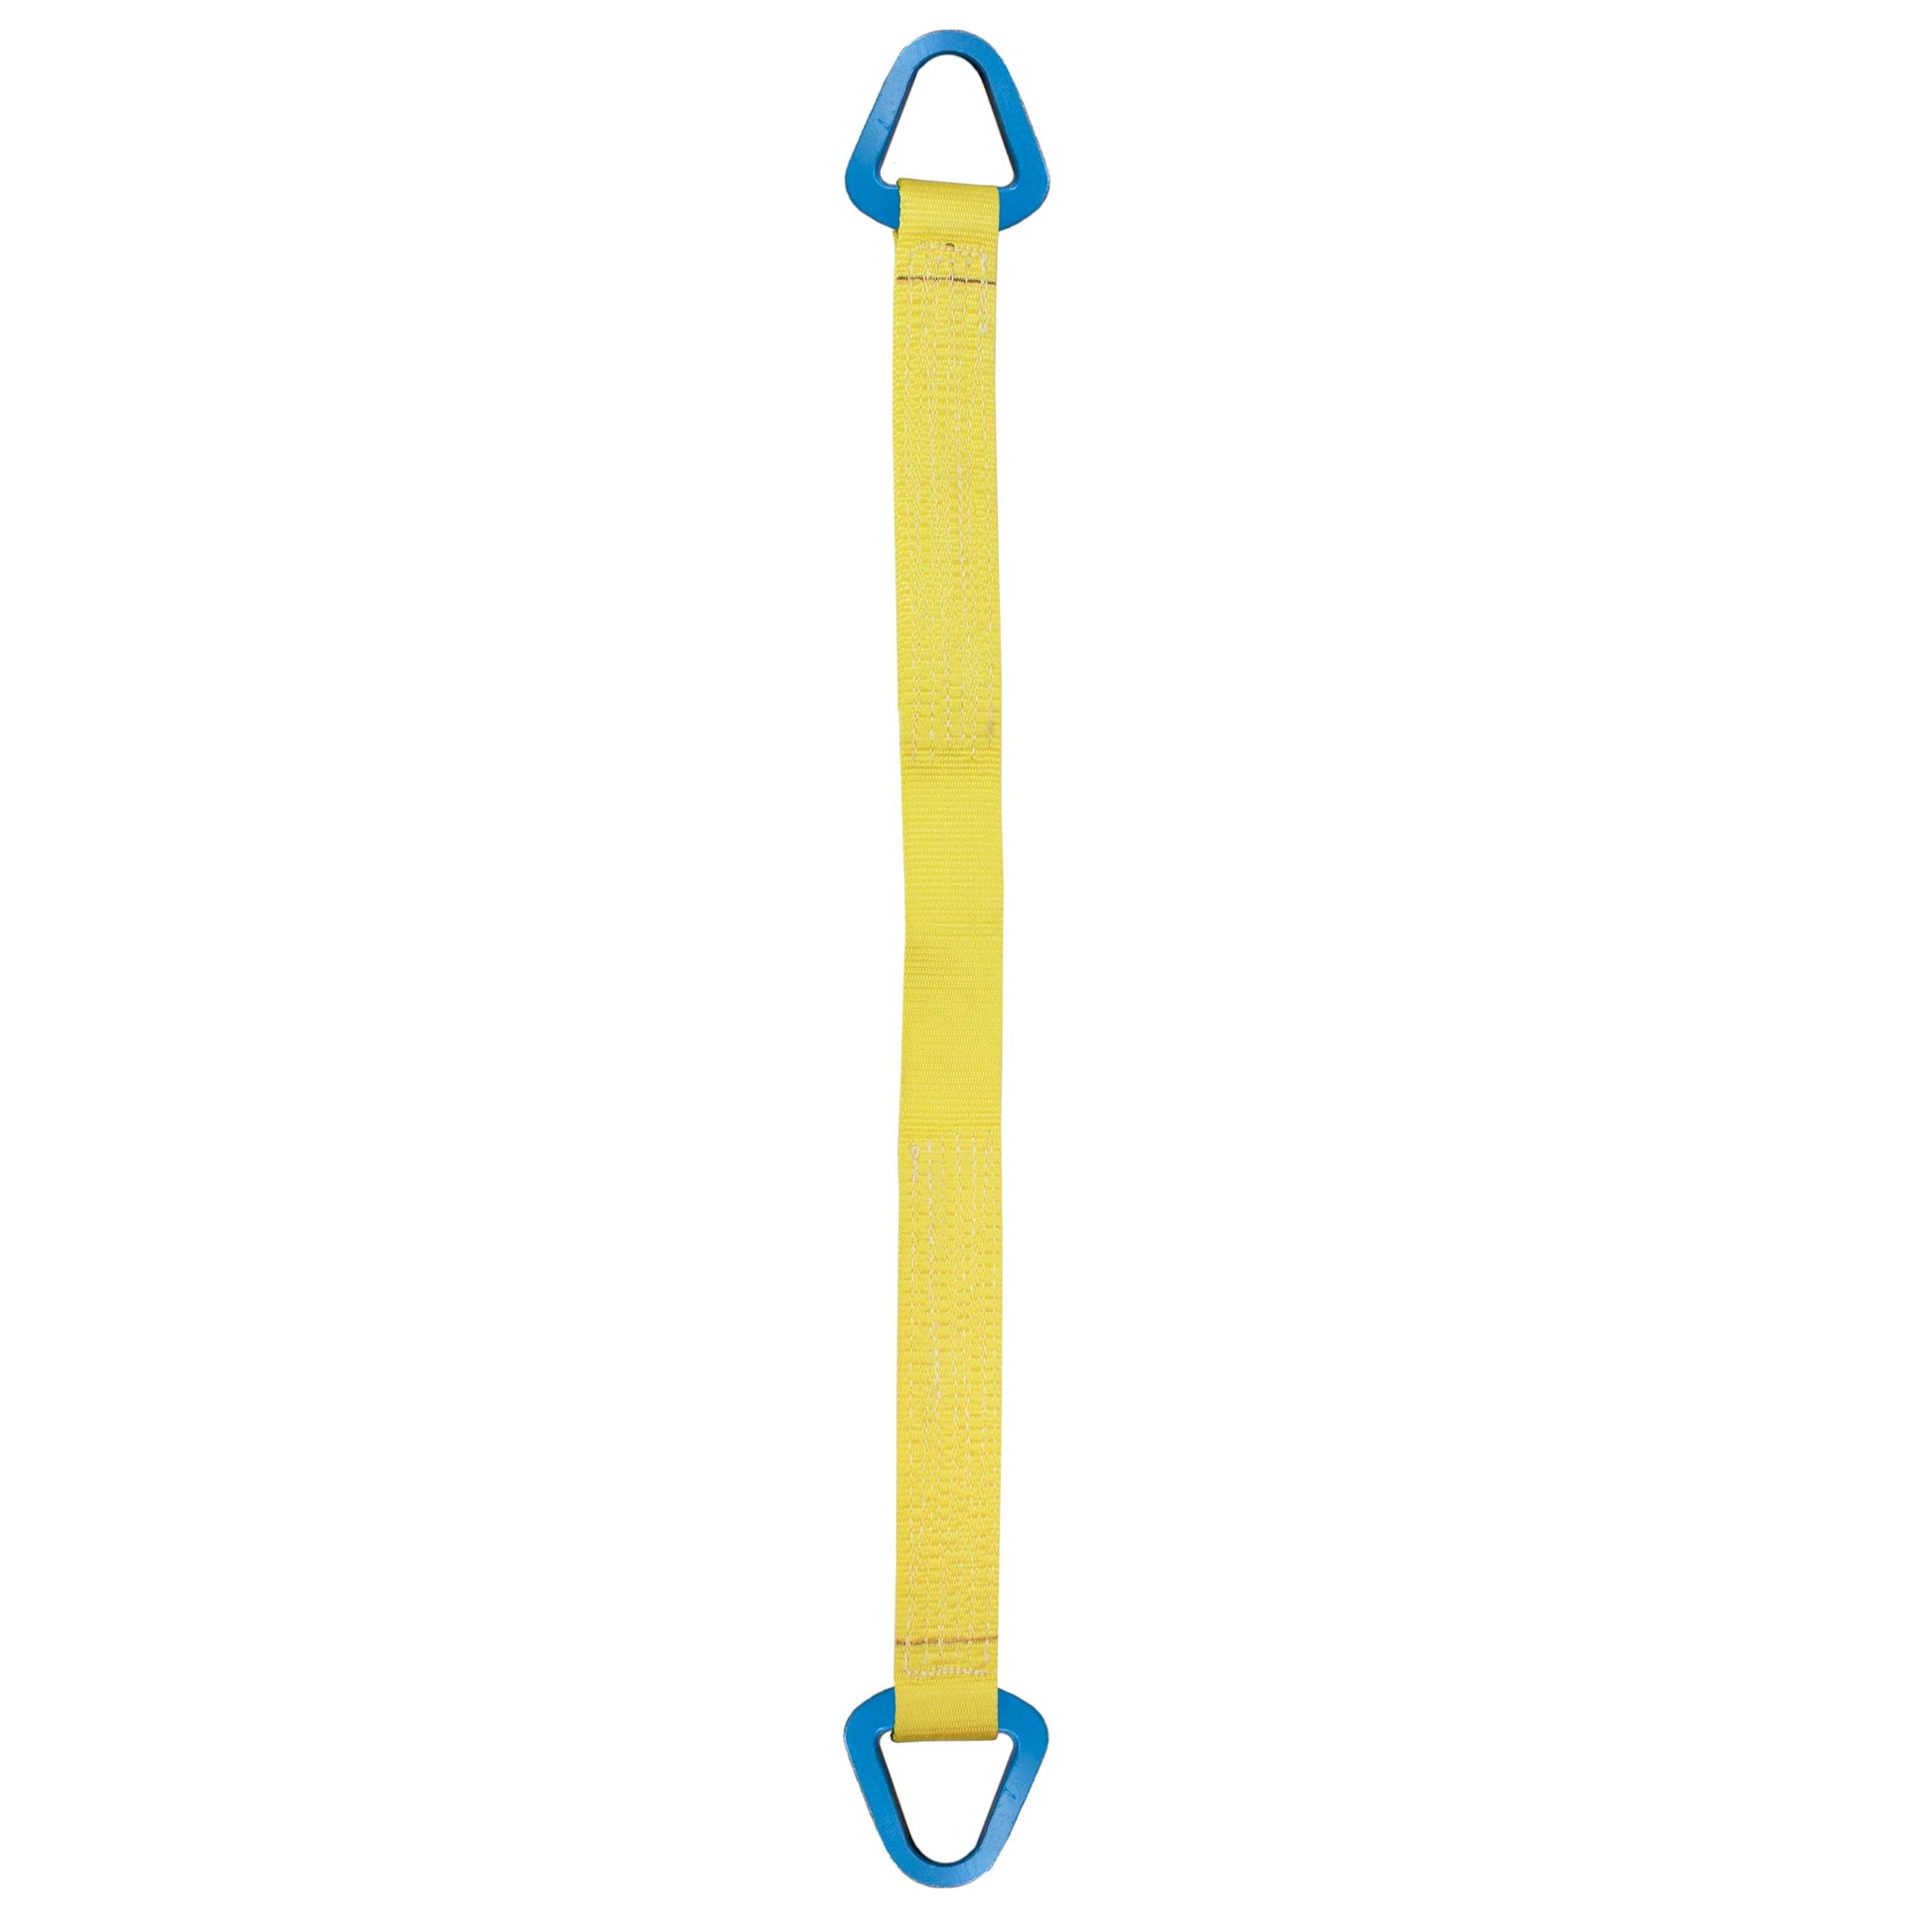 Nylon Lifting Sling Triangle 4 inch x 20 foot 2ply image 1 of 2